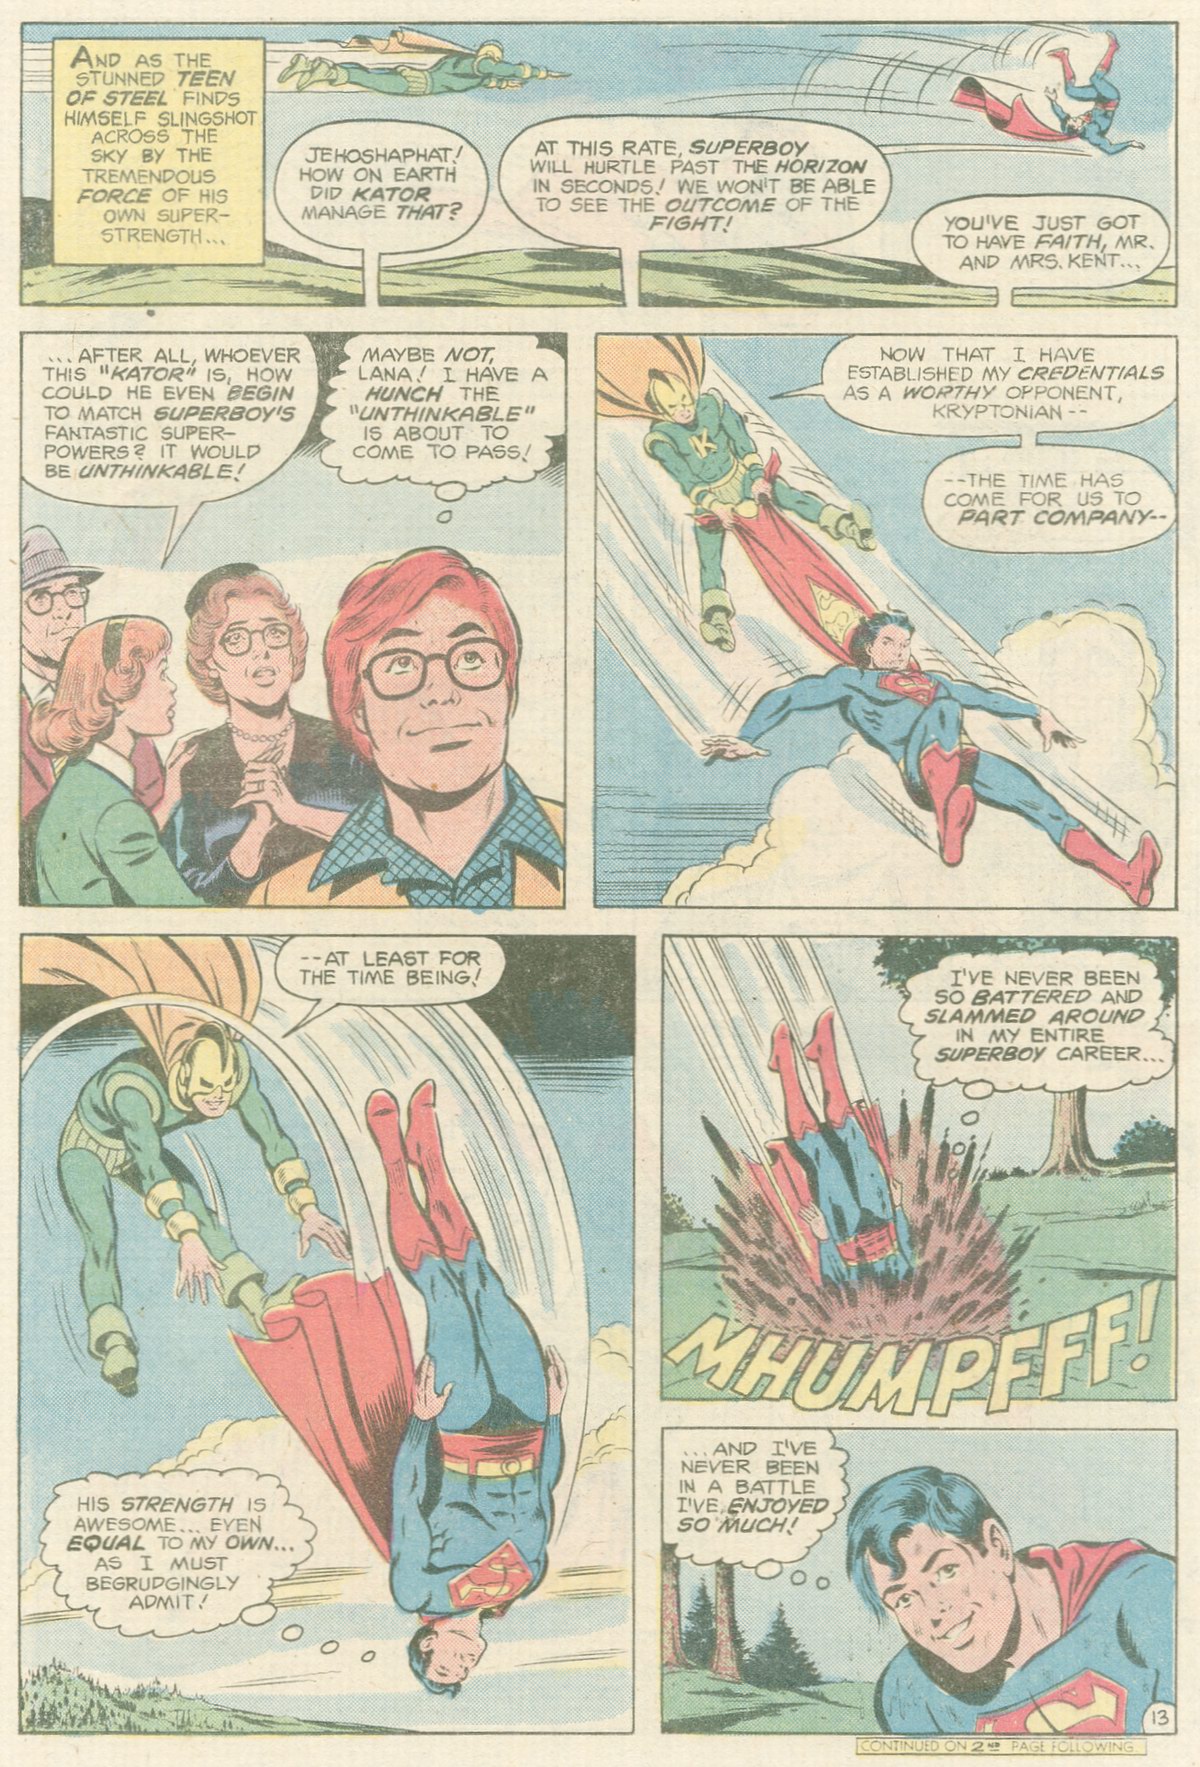 The New Adventures of Superboy 17 Page 13